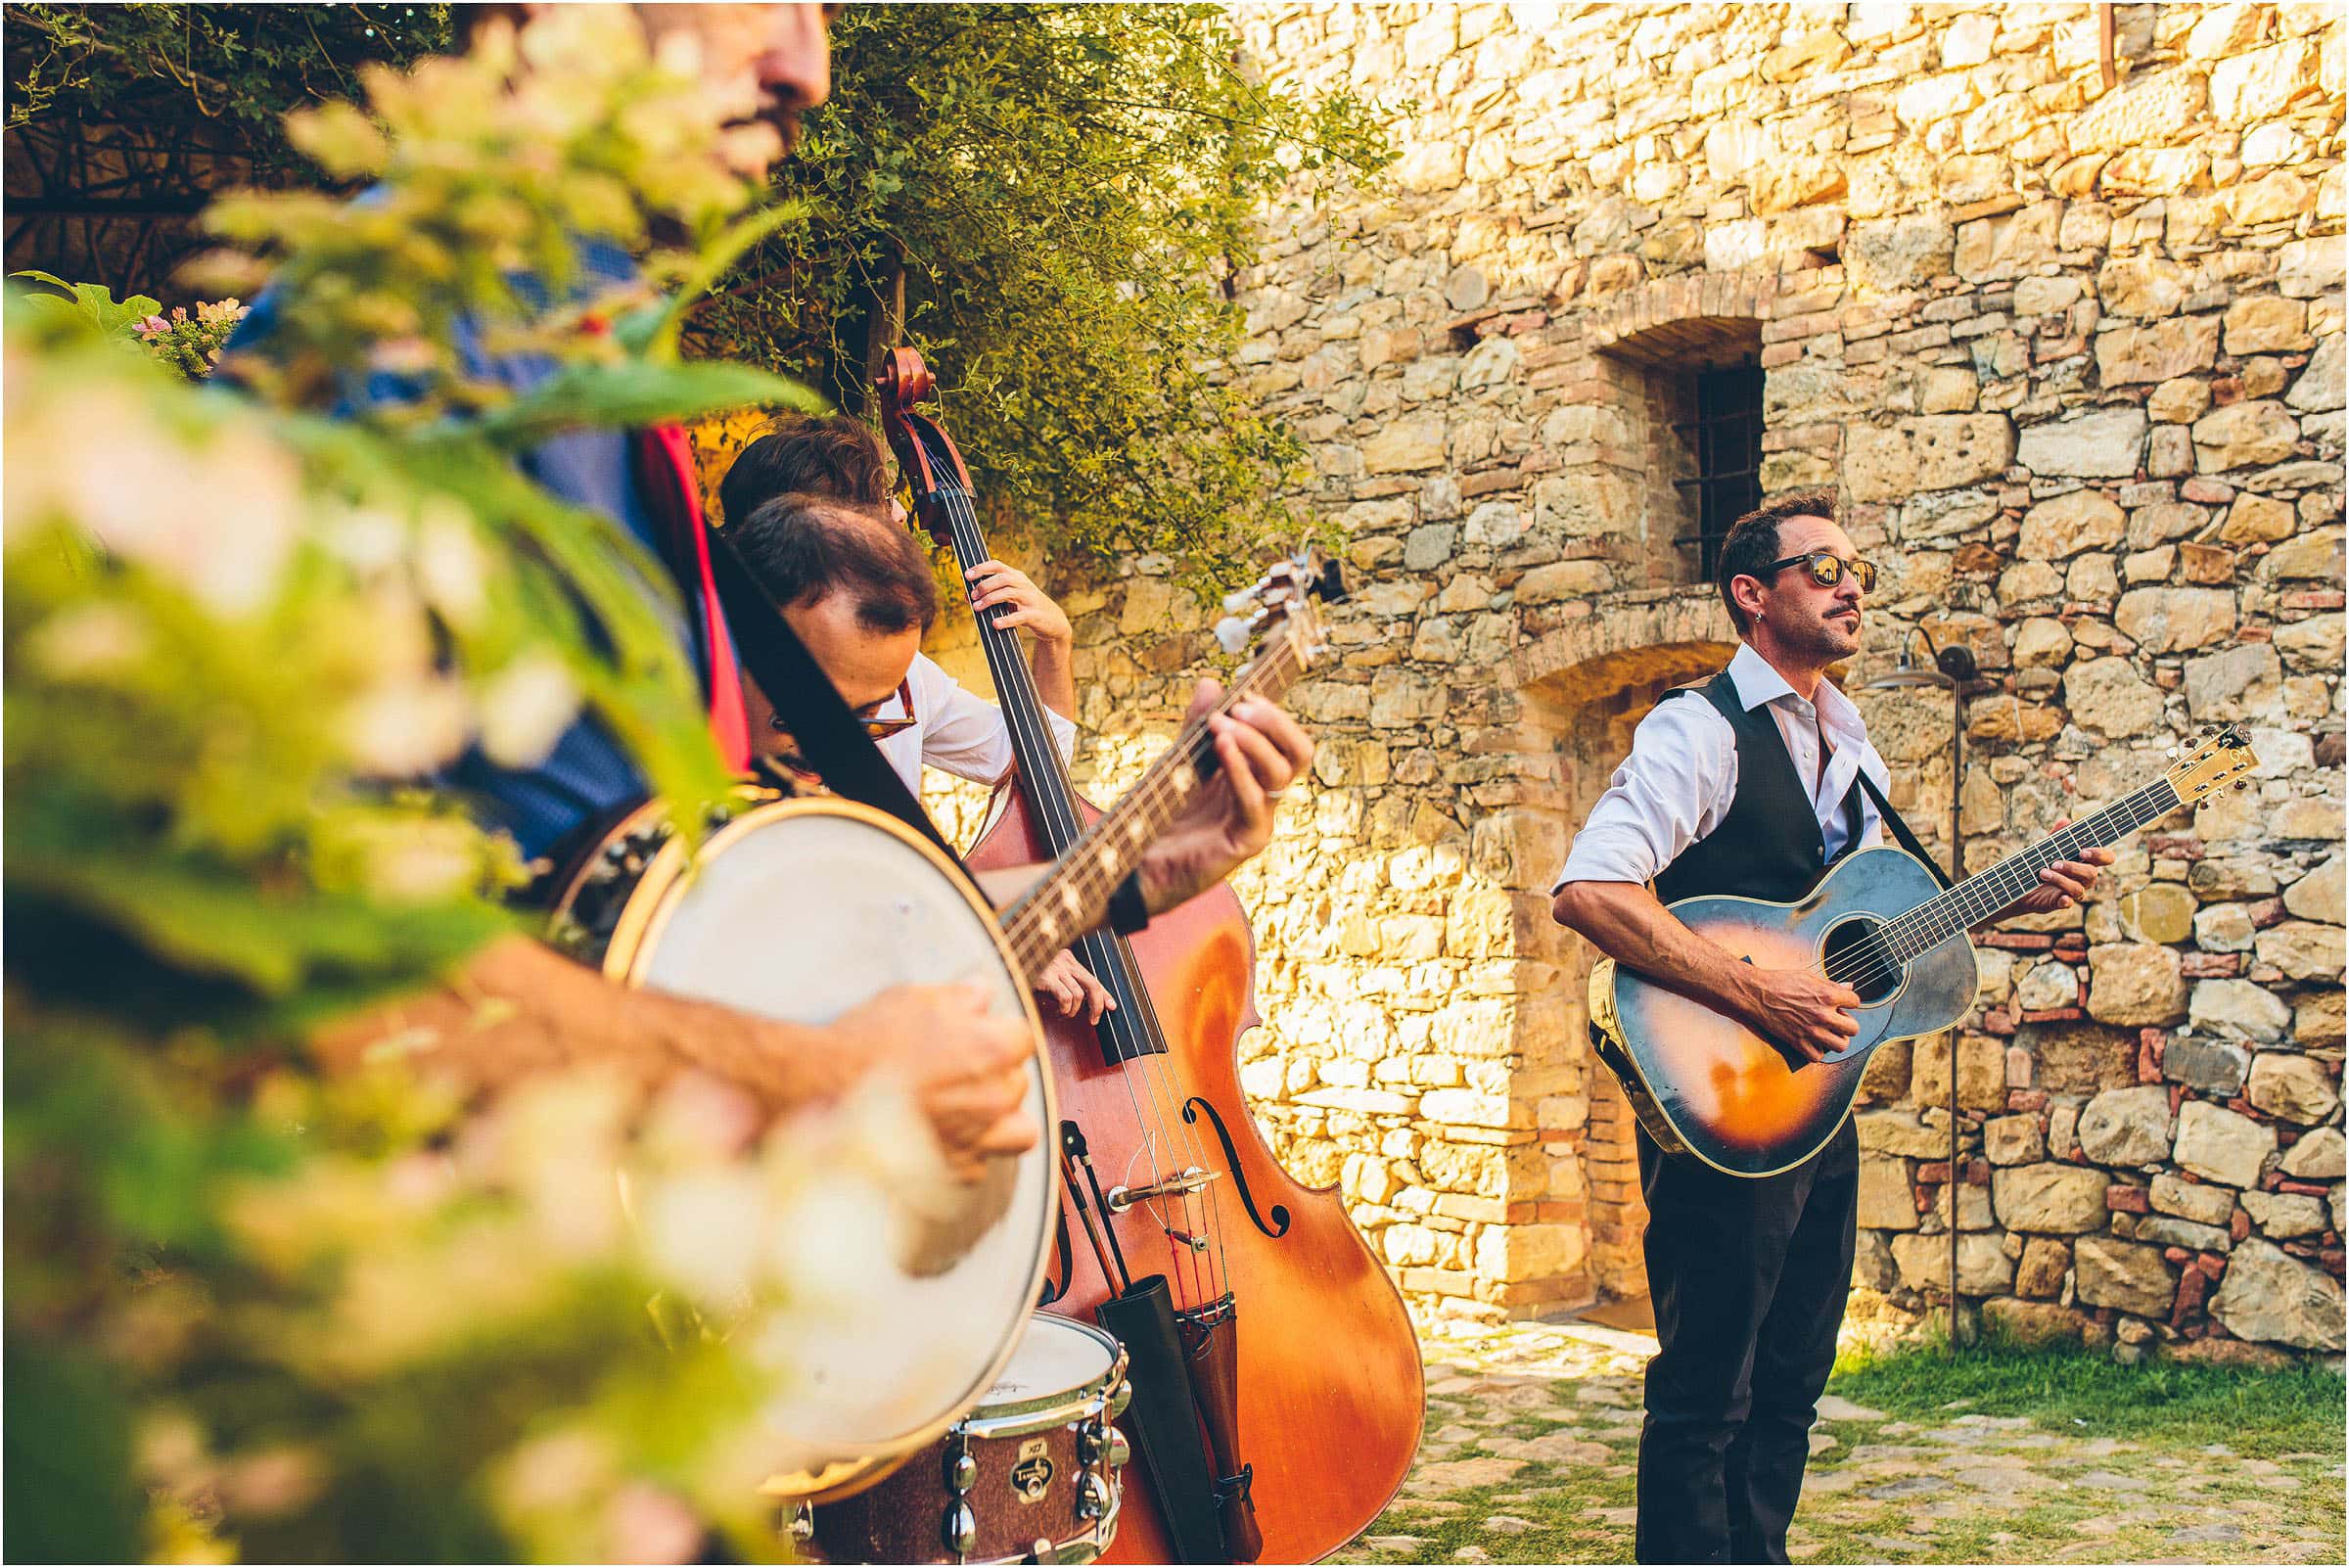 At Castello di Vicarello in Tuscany a wedding band plays in the sunshine with a guitar, double bass, banjo and a snare drum